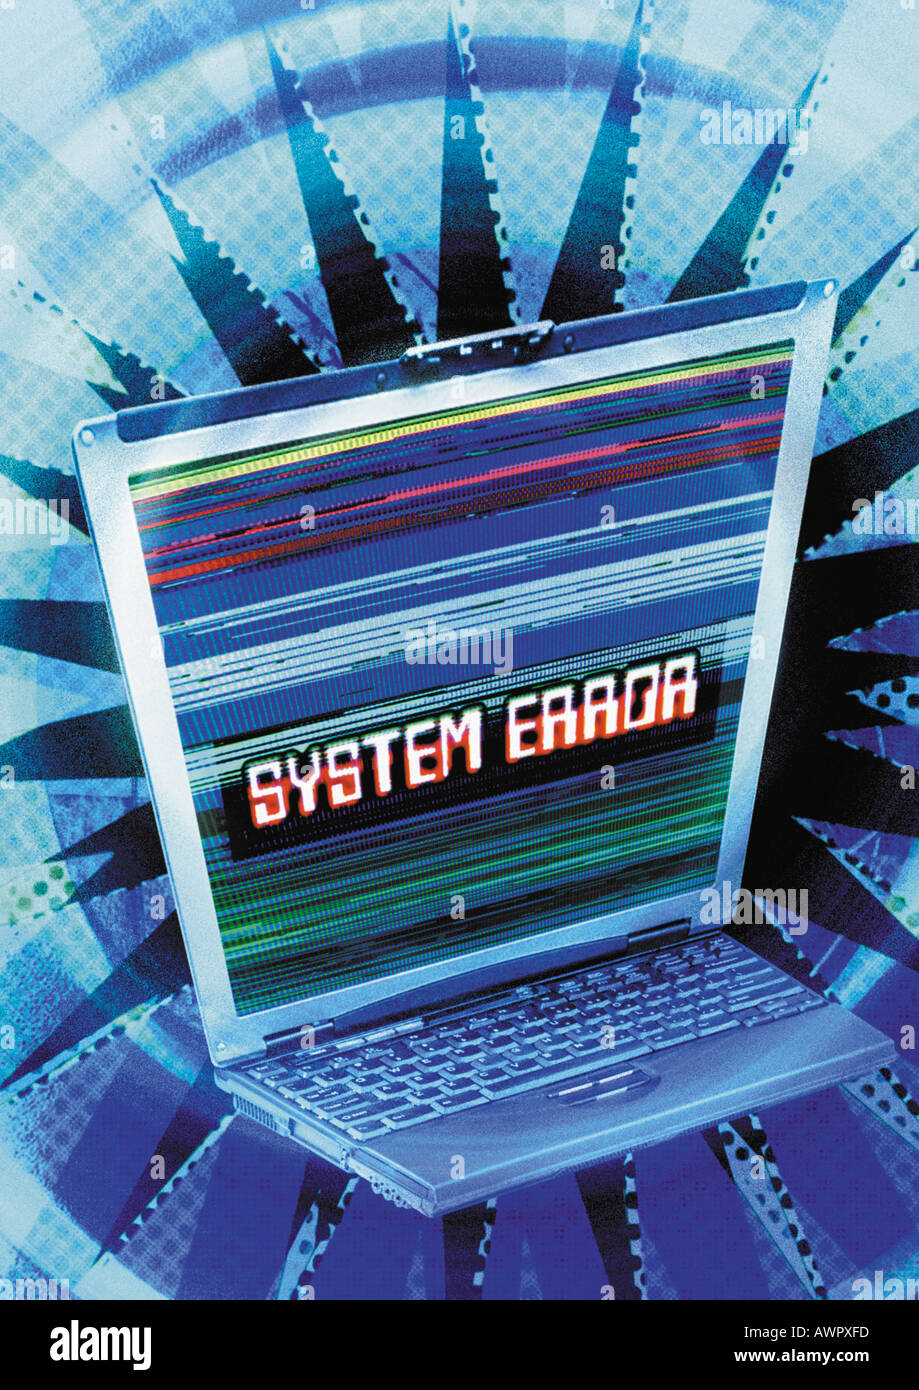 Laptop in cyberspace, 'System Error' message on screen, digital composite. Stock Photo